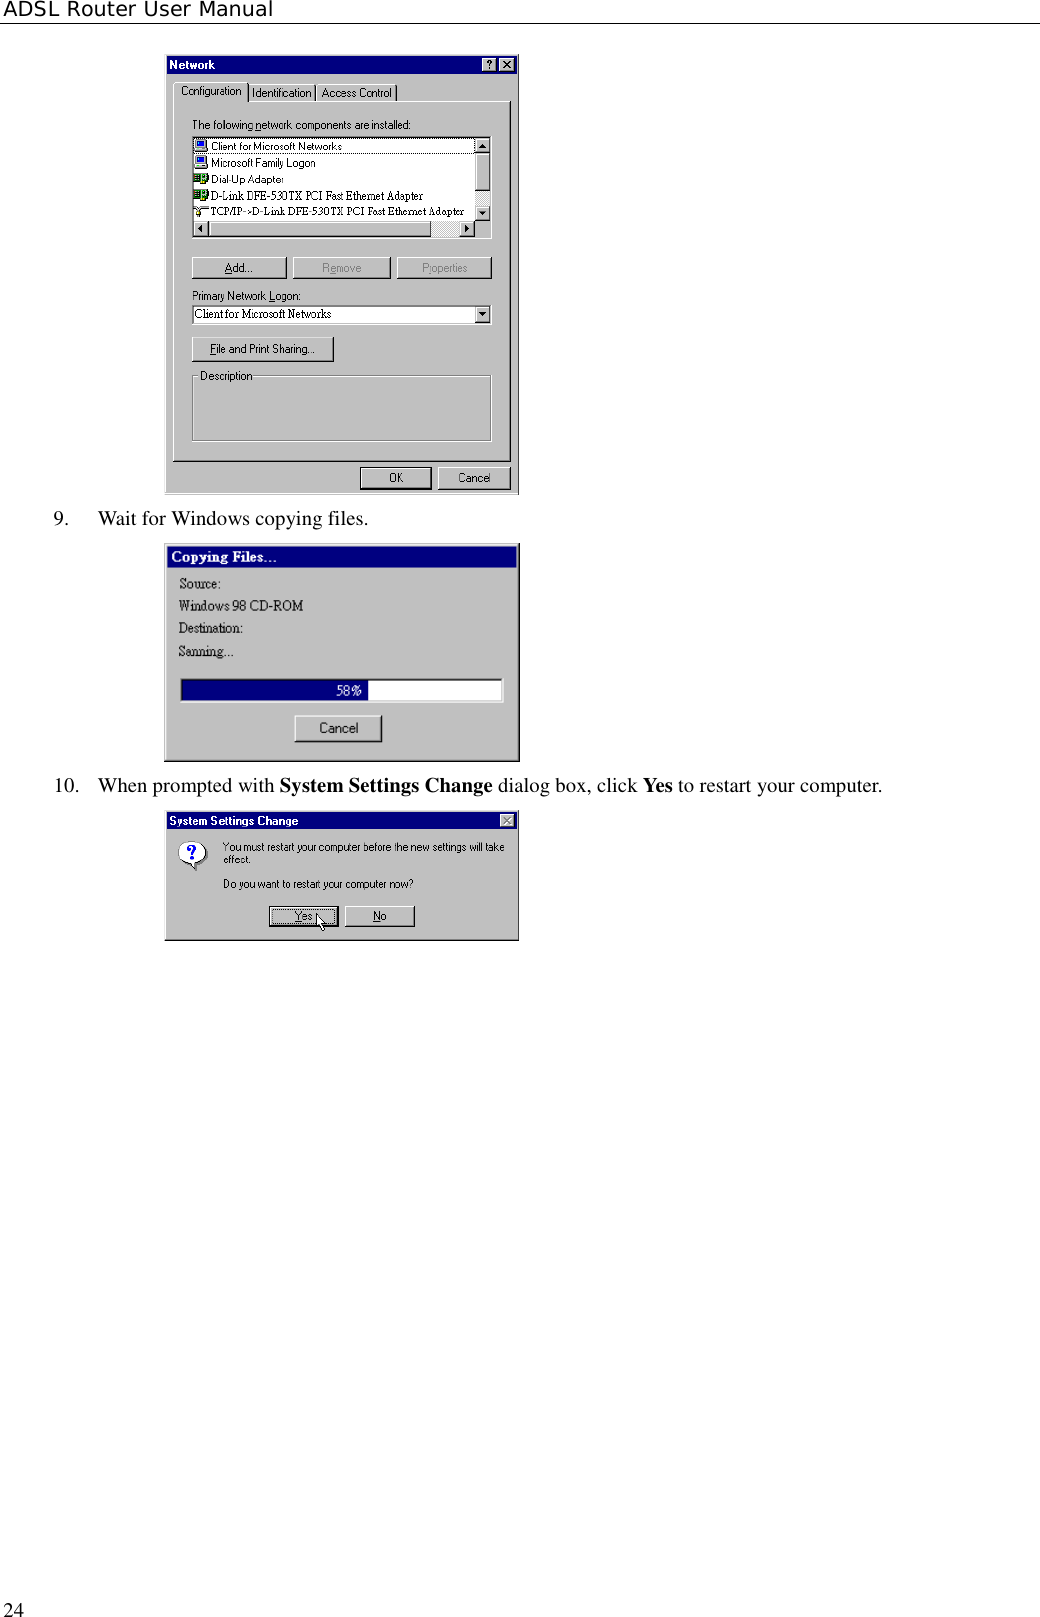 ADSL Router User Manual249. Wait for Windows copying files.10. When prompted with System Settings Change dialog box, click Yes to restart your computer.